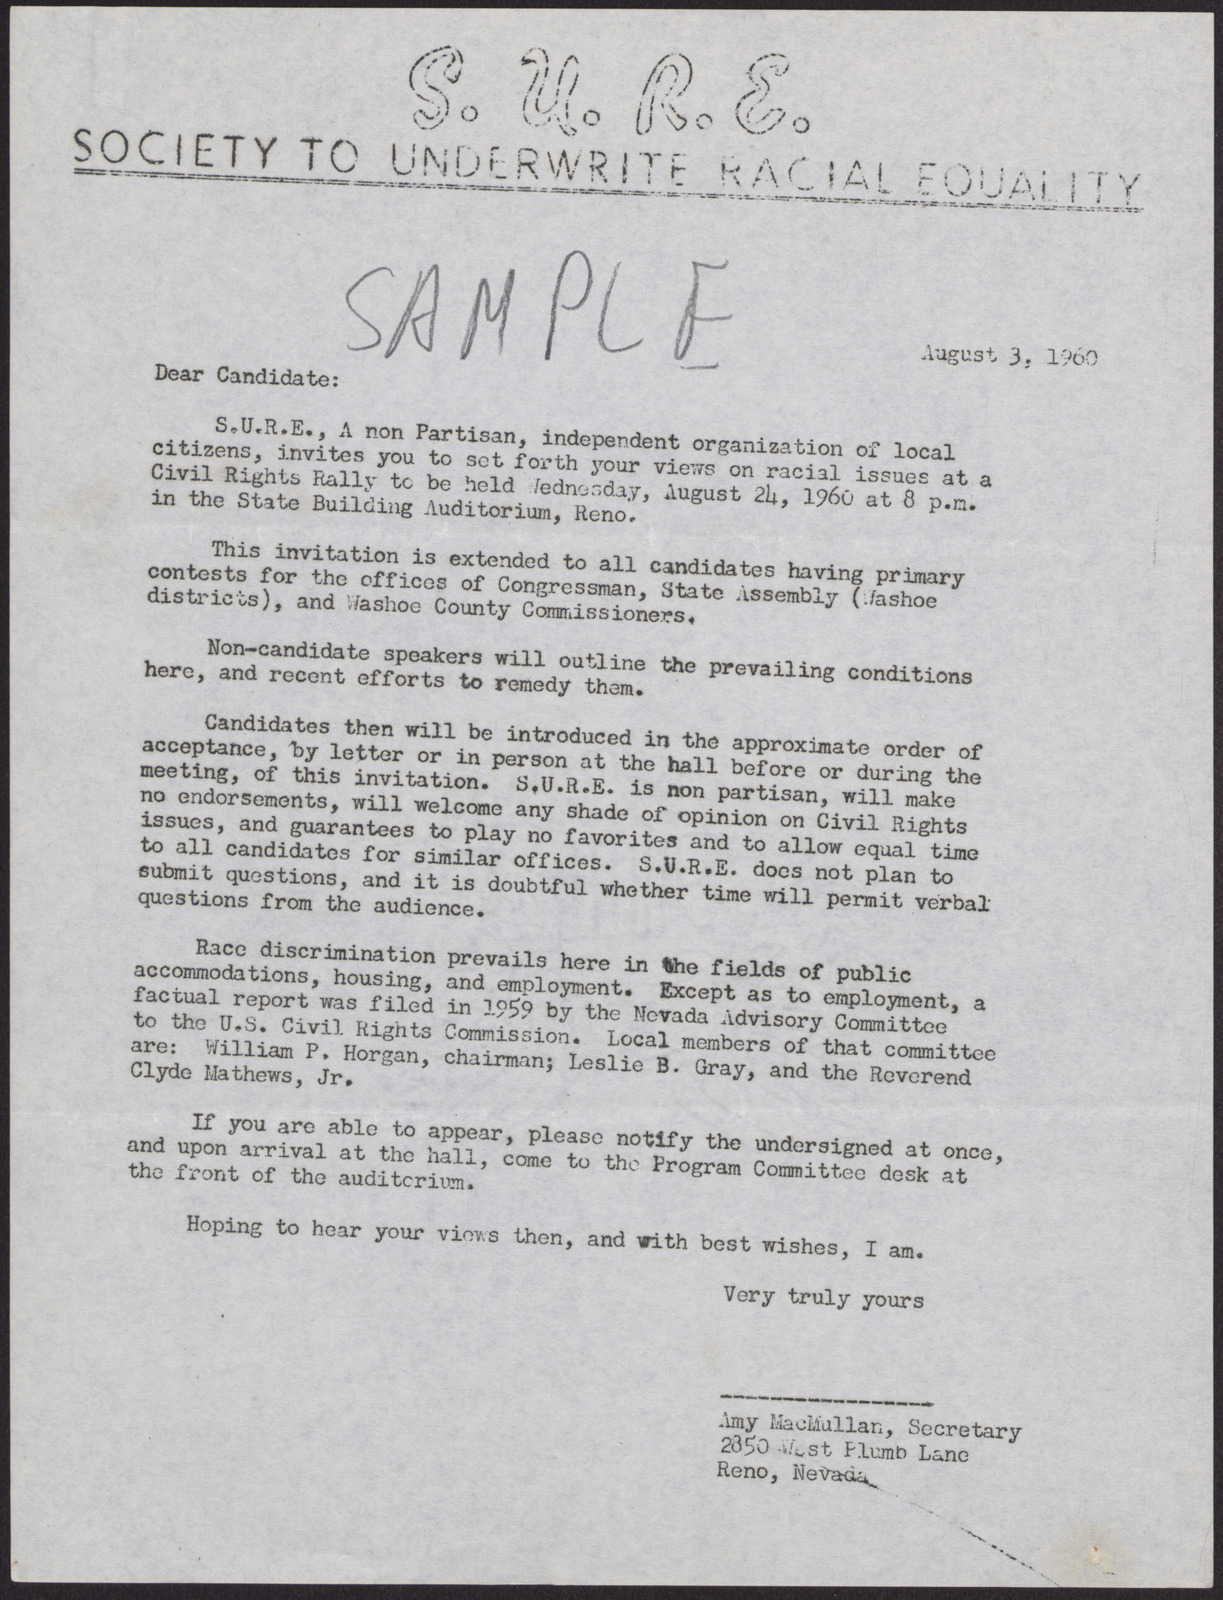 Sample letter to Congressional, State Assembly, and Washoe County Commissioner candidates from the S.U.R.E., August 3, 1960